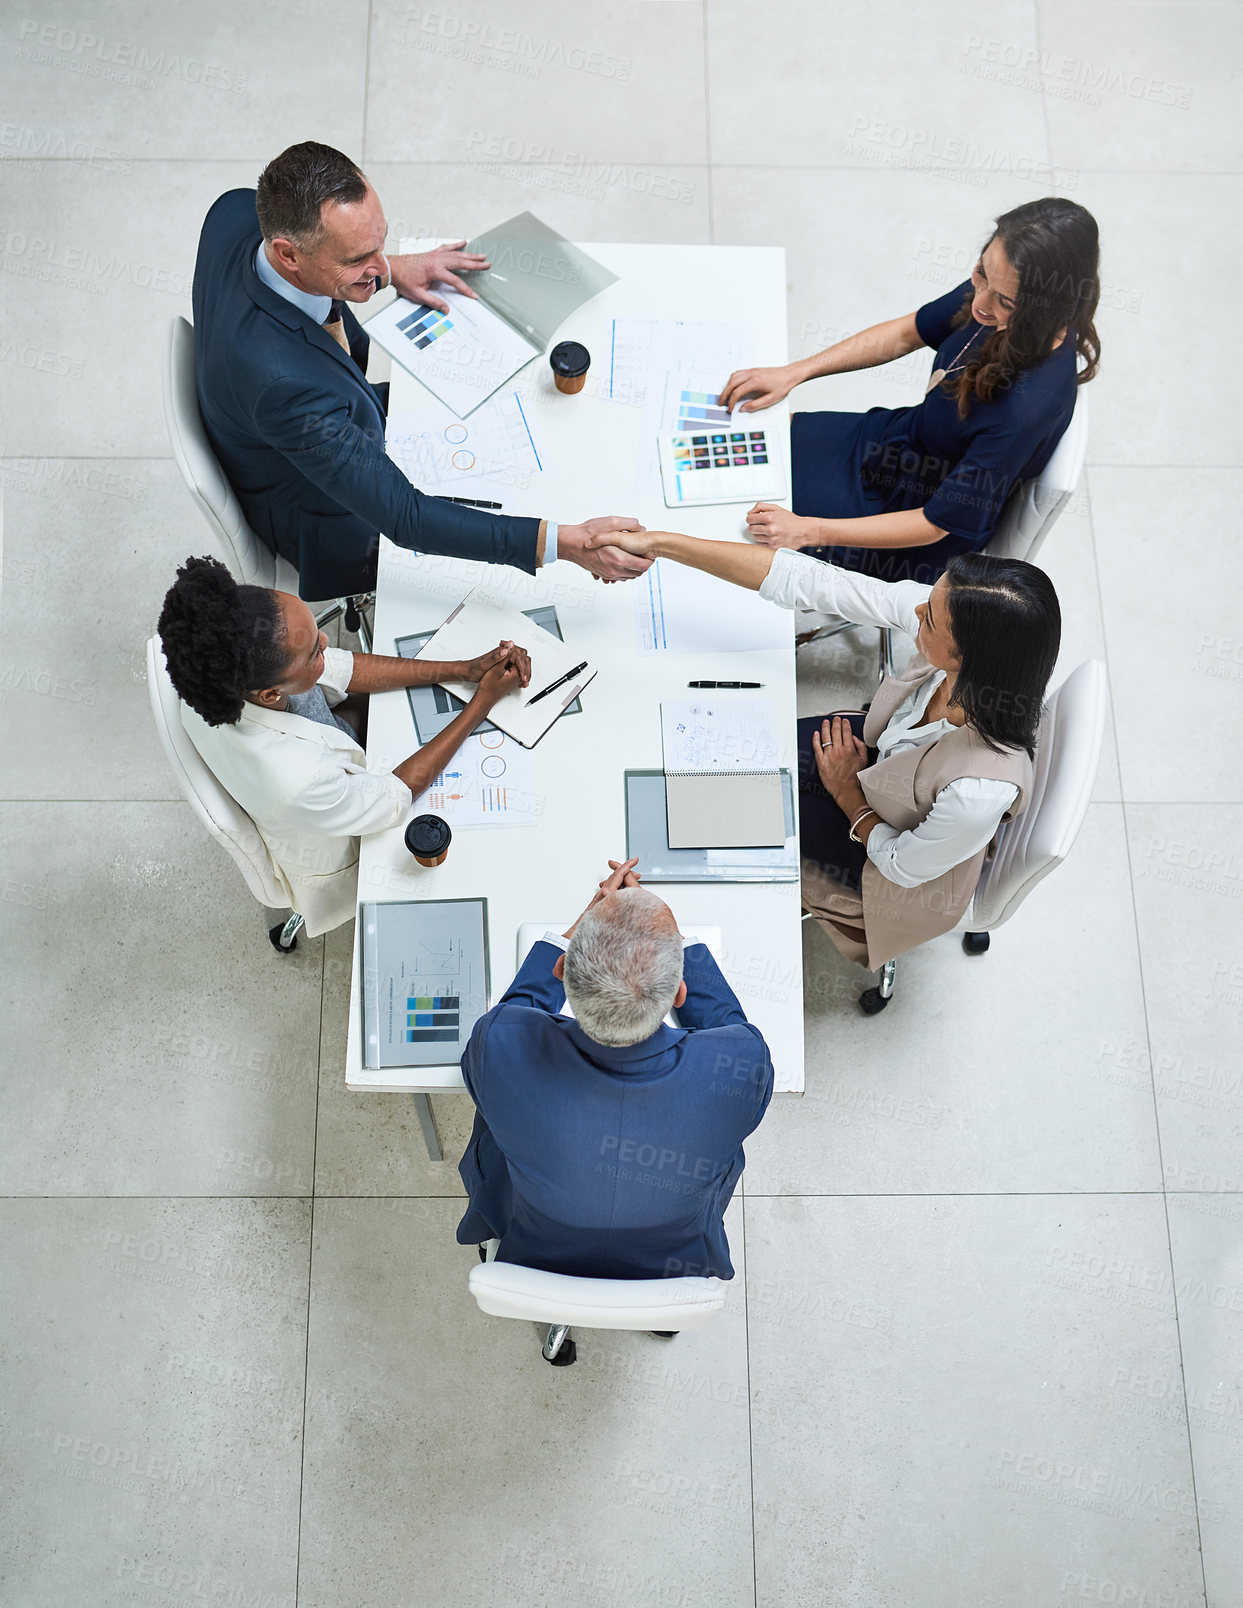 Buy stock photo High angle shot of businesspeople having a meeting in a modern office